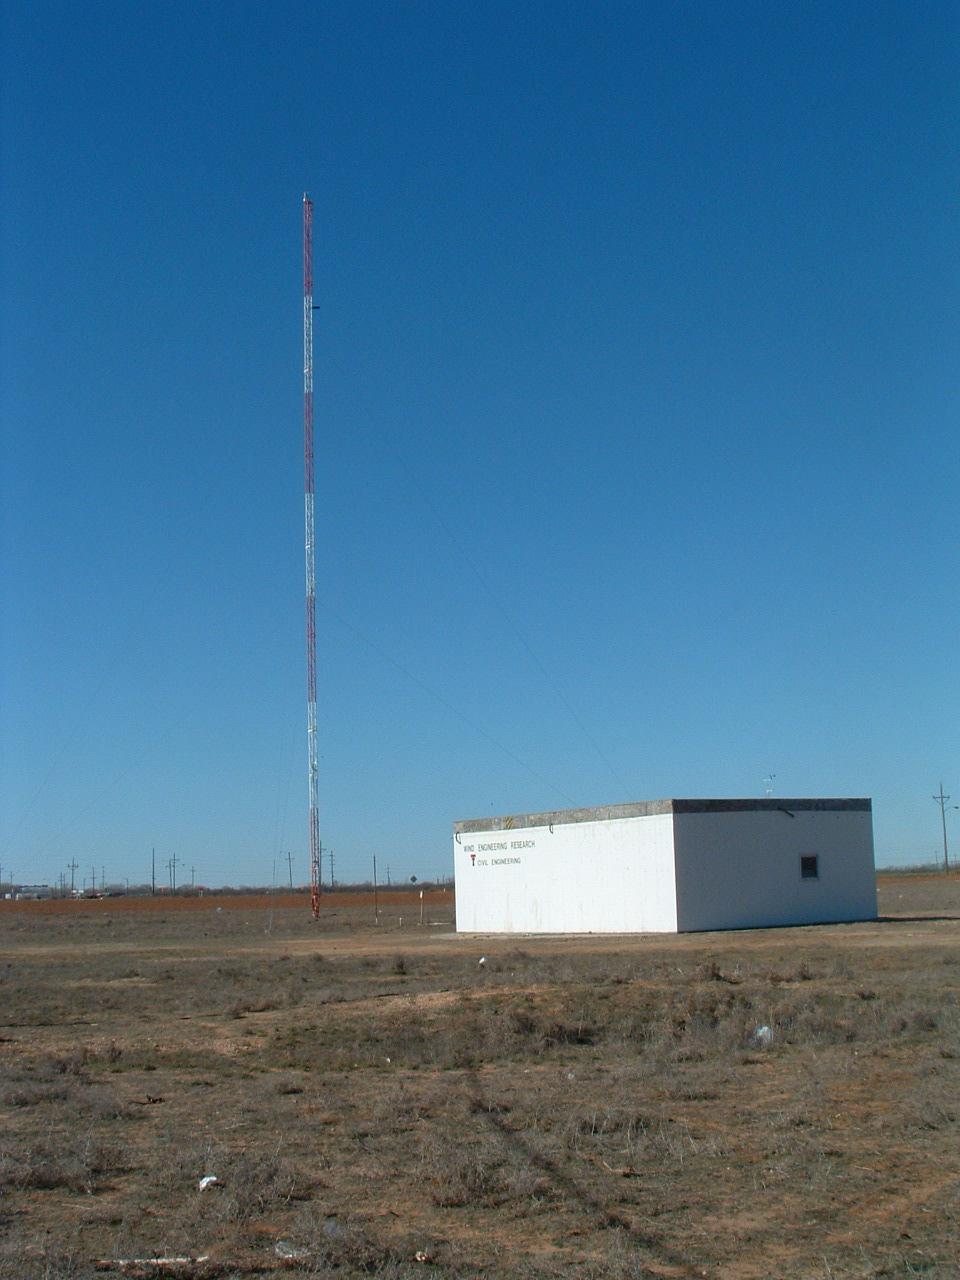 Figure 3 Meteorological tower located at the Wind